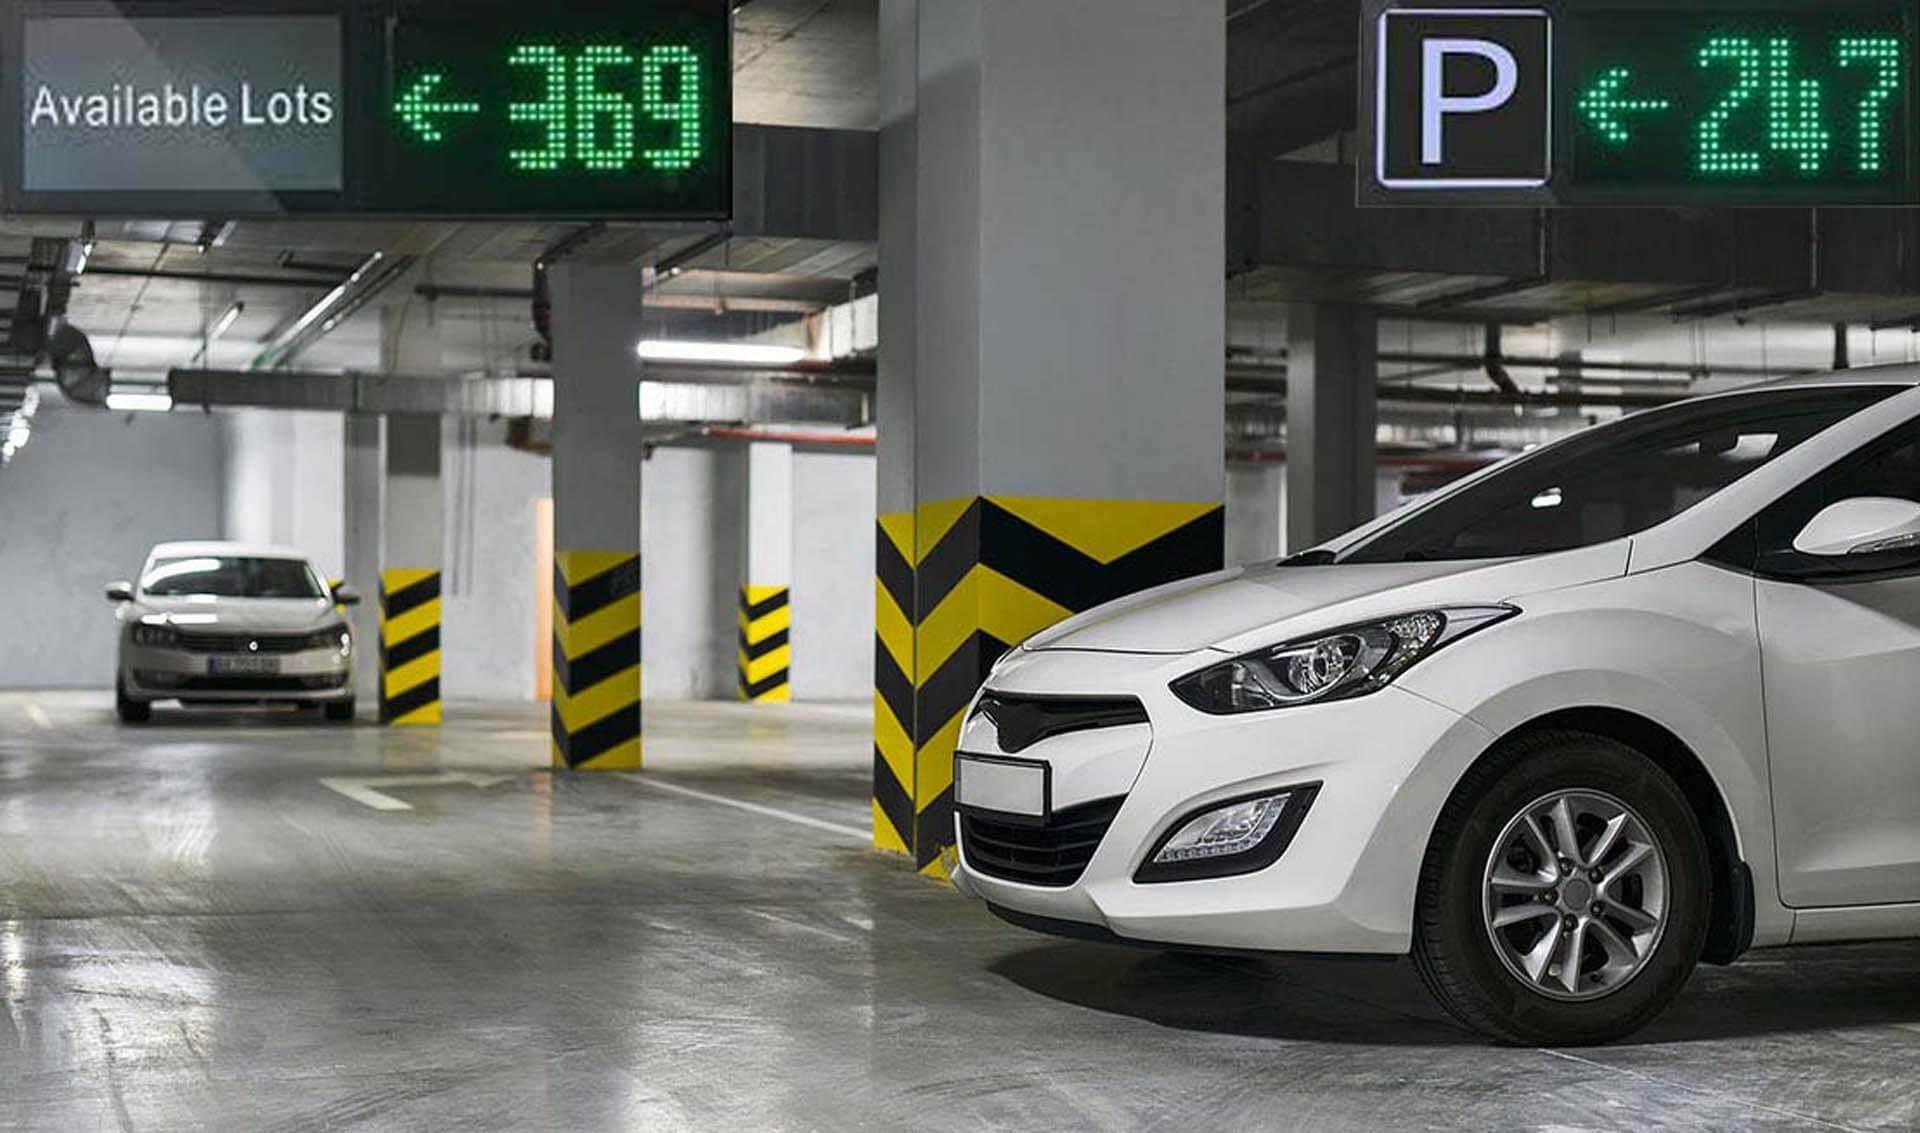 Parking guidance system